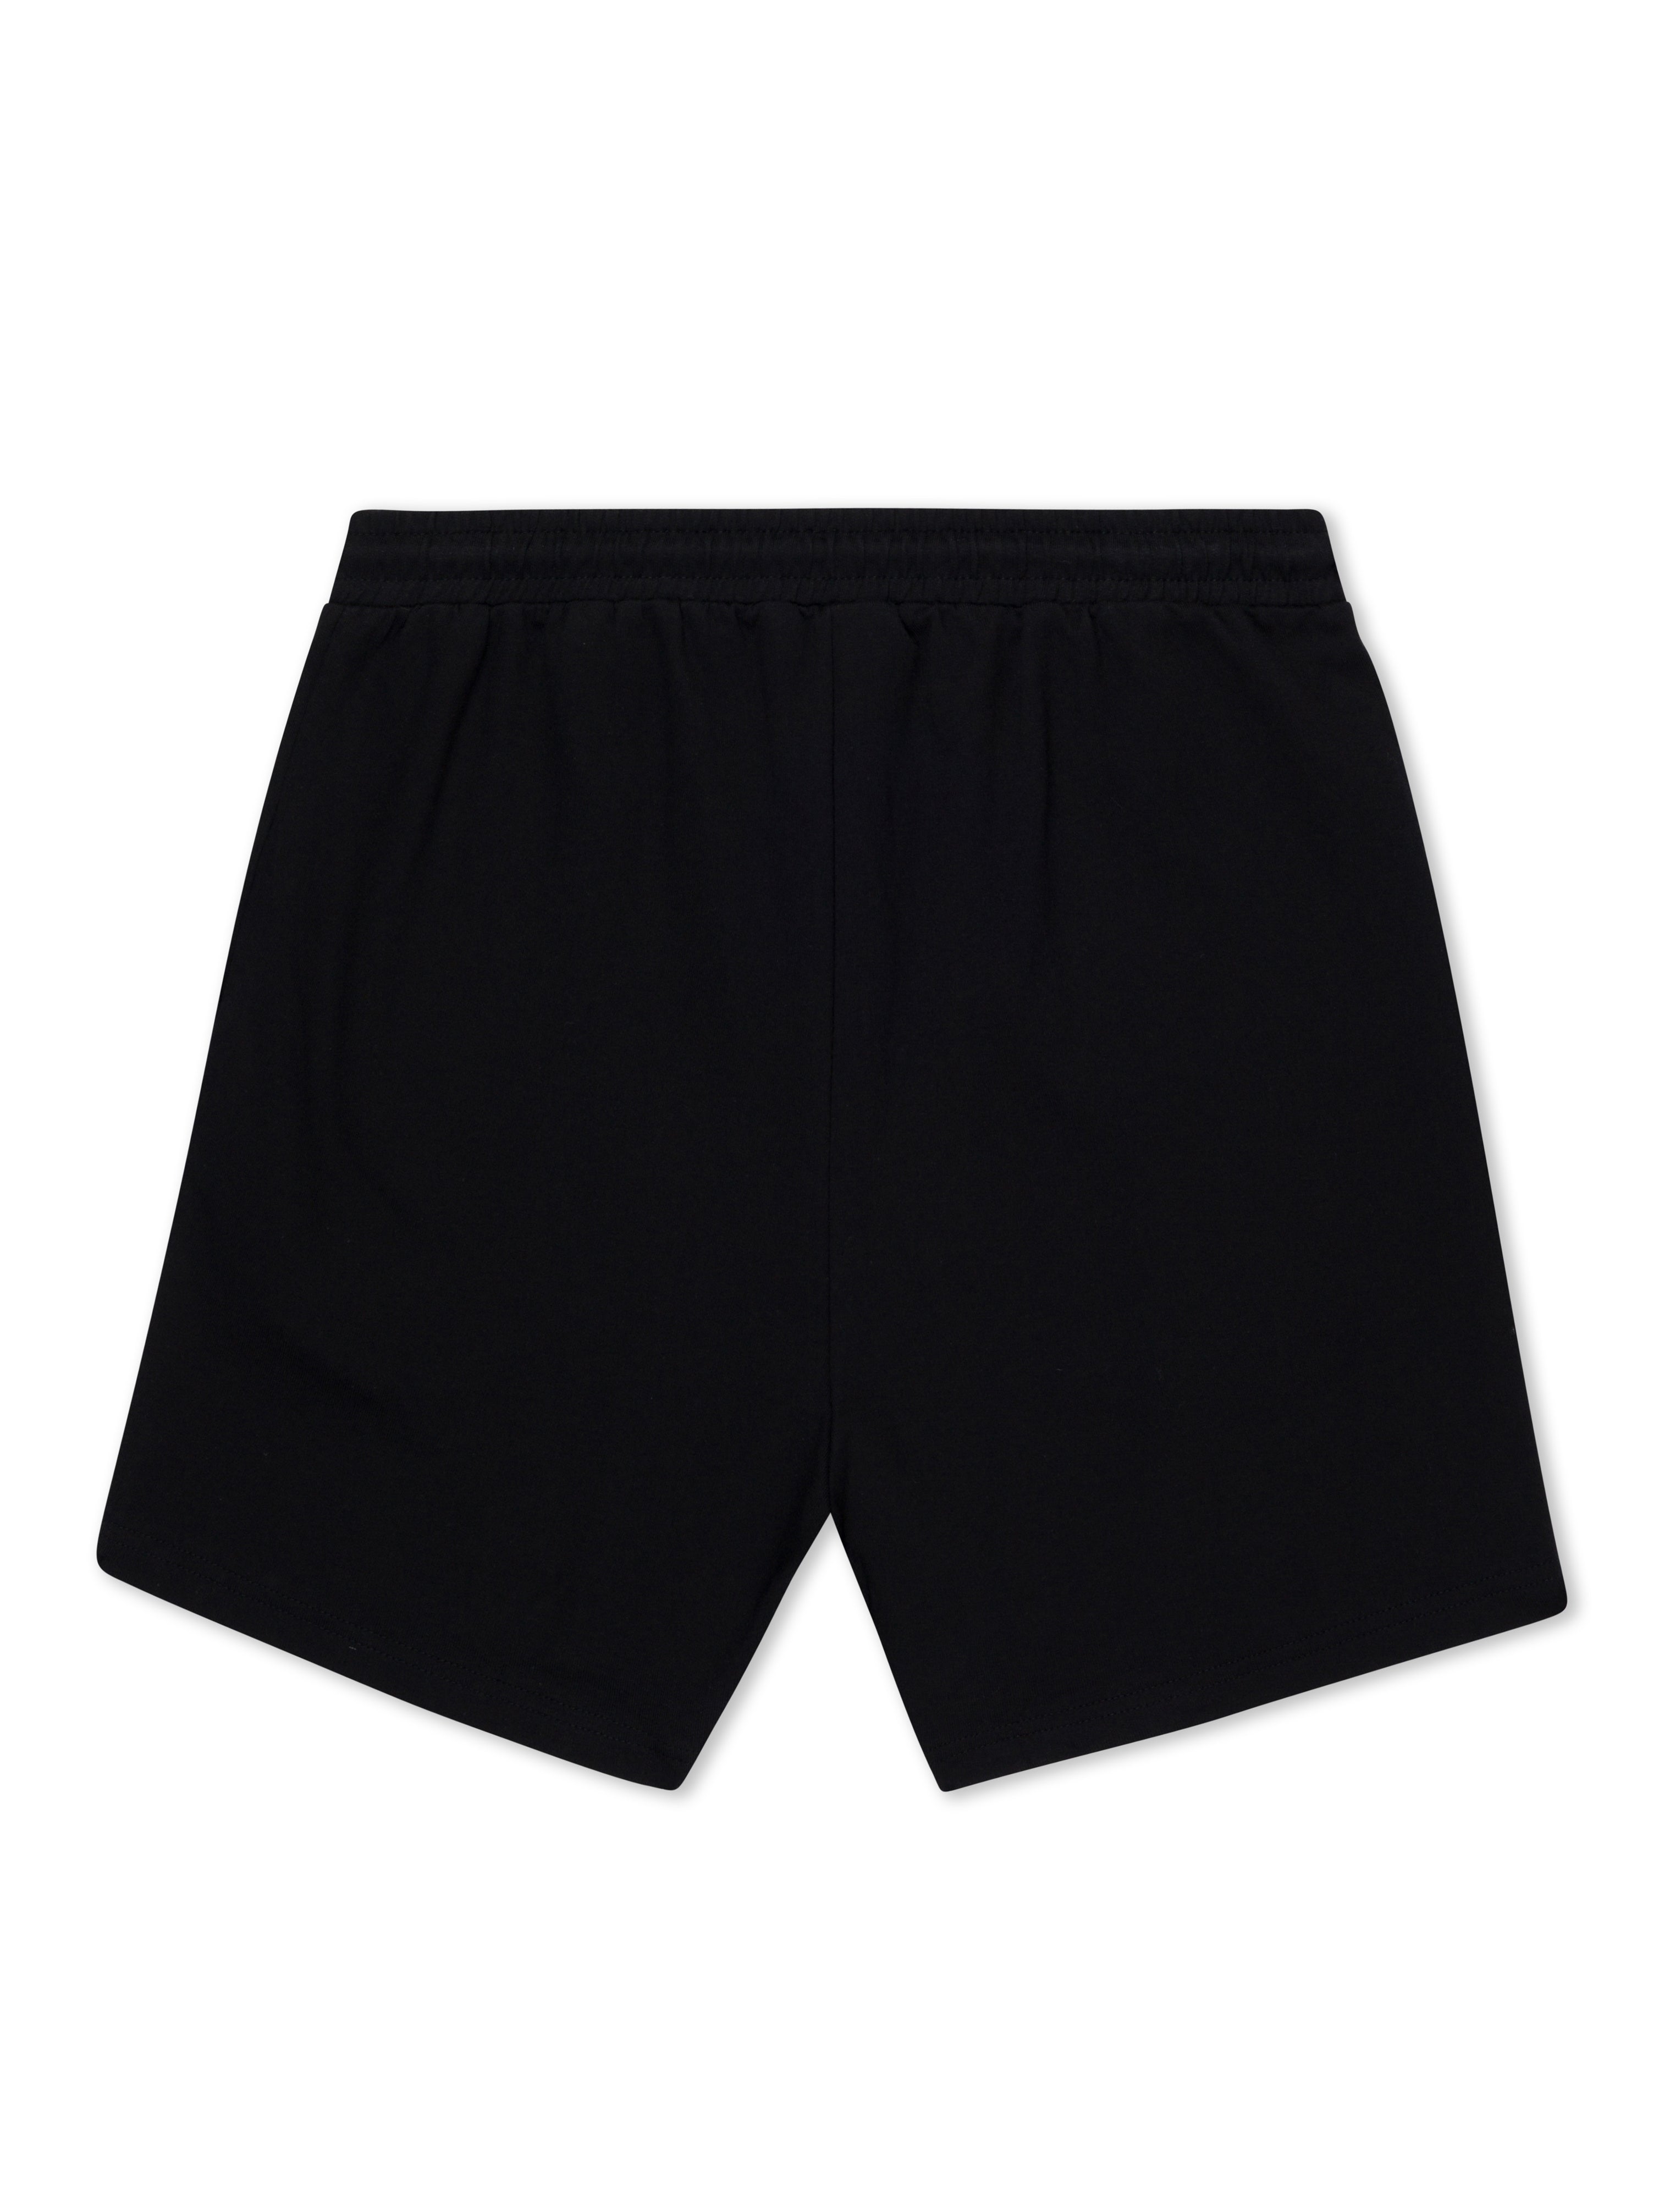 Mens Black Cotton Gym Shorts | Sol Apparel | Buy Yours Today